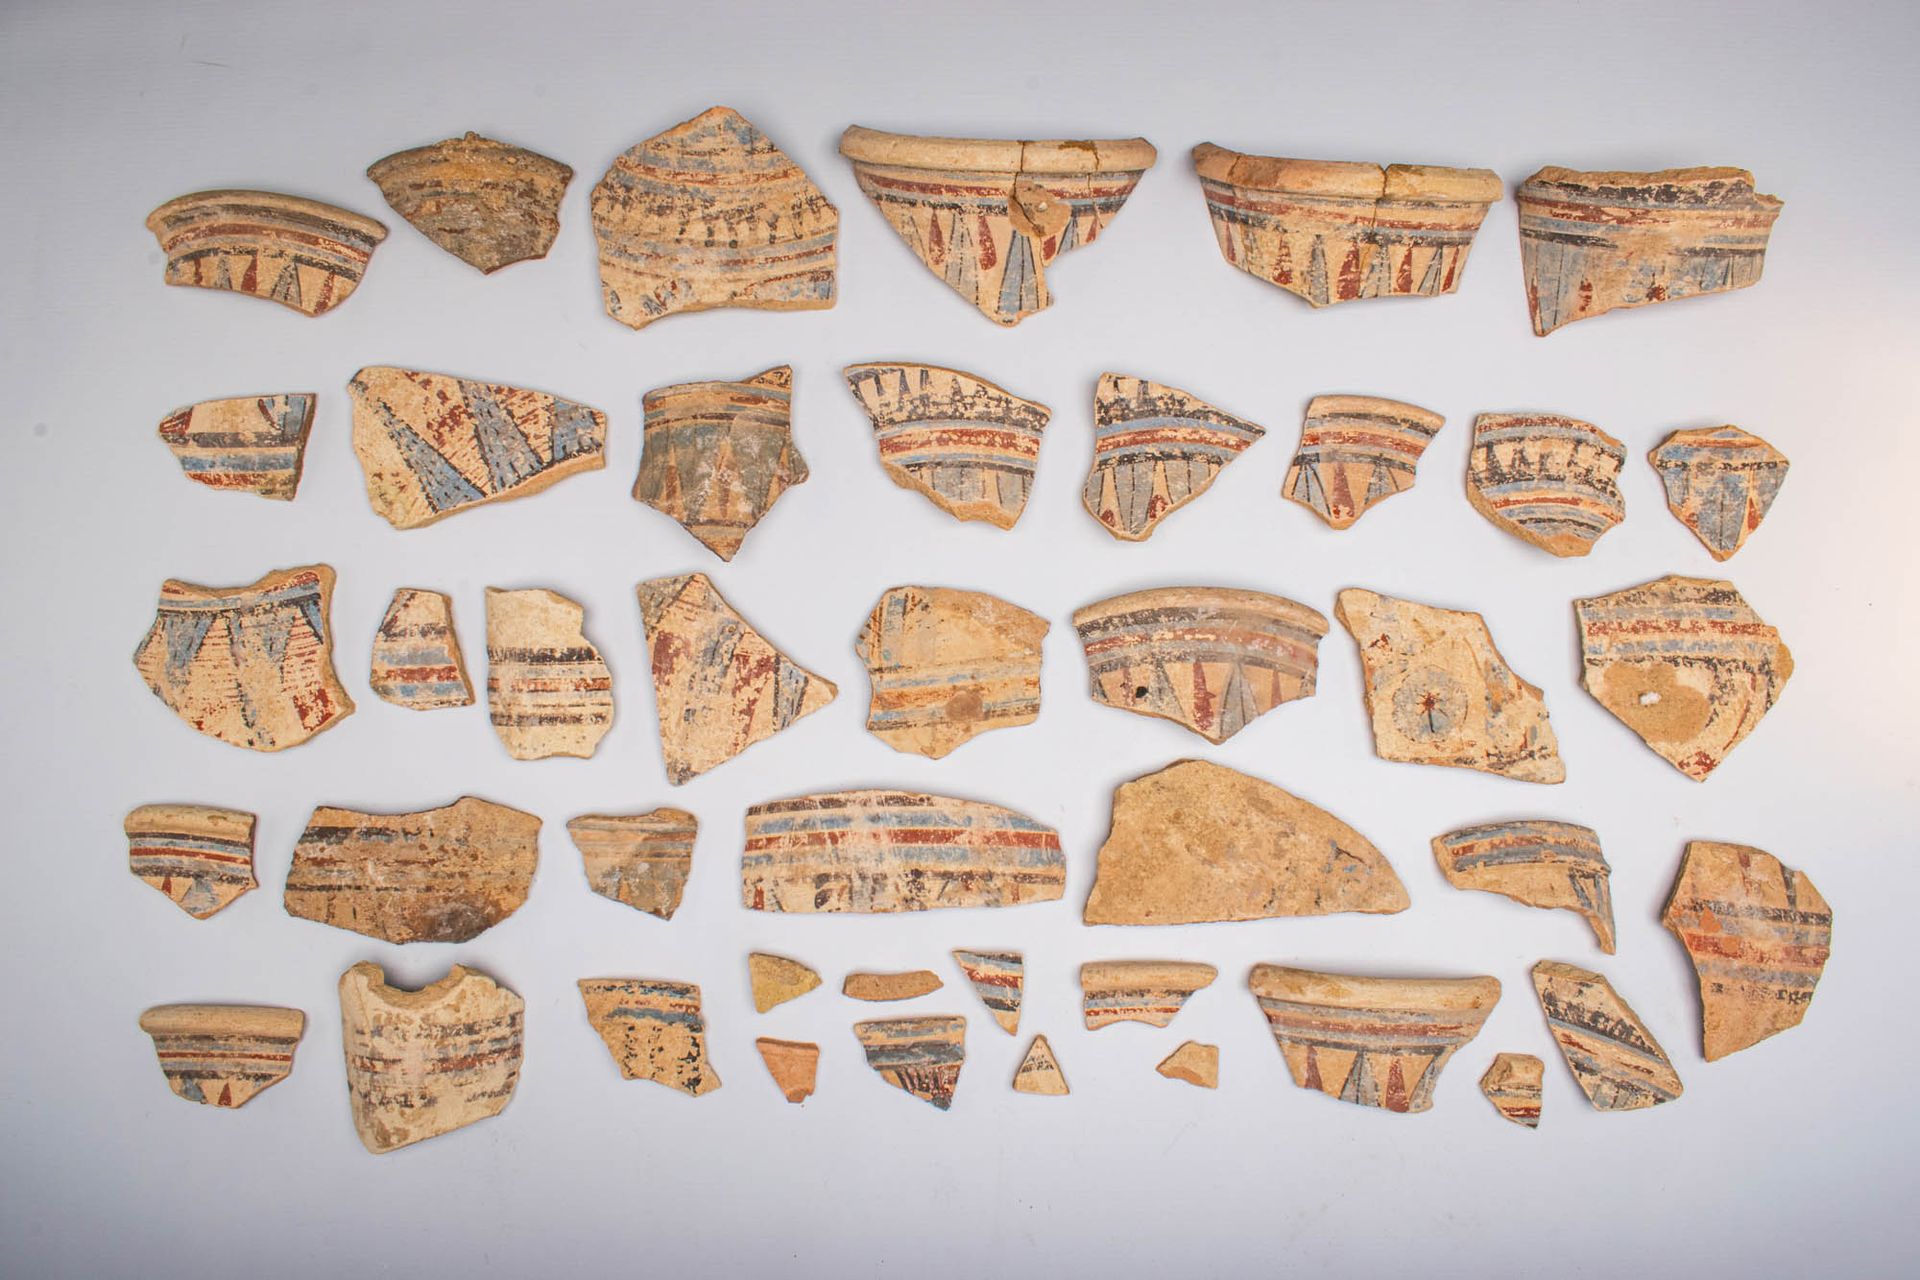 COLLECTION OF EGYPTIAN PAINTED POTTERY JAR FRAGMENTS 新王国，第 18 王朝，阿玛尔纳时期，约公元前 135&hellip;